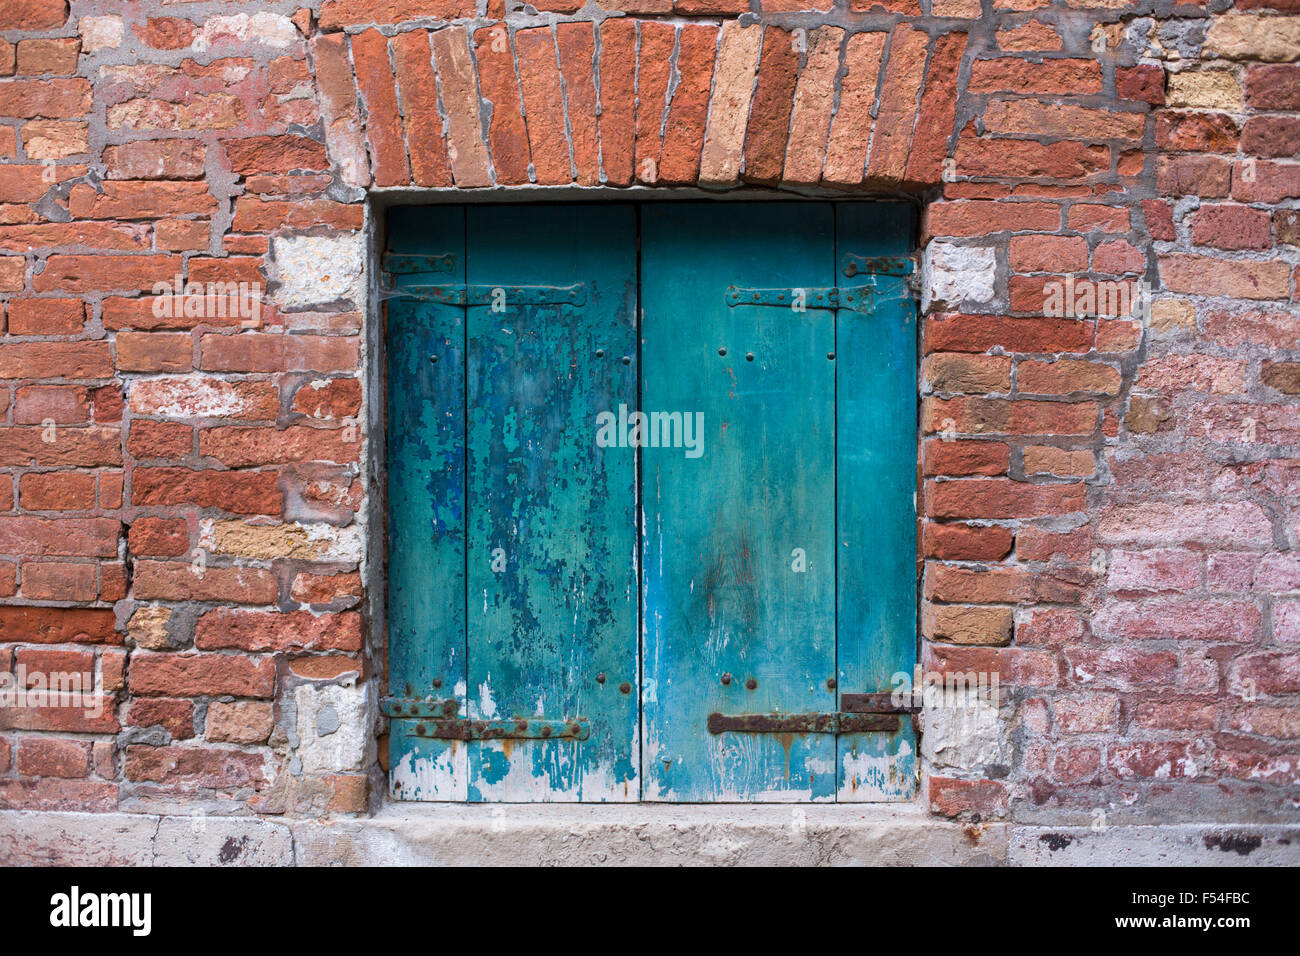 Old teal shutters on window in Venice, Italy Stock Photo